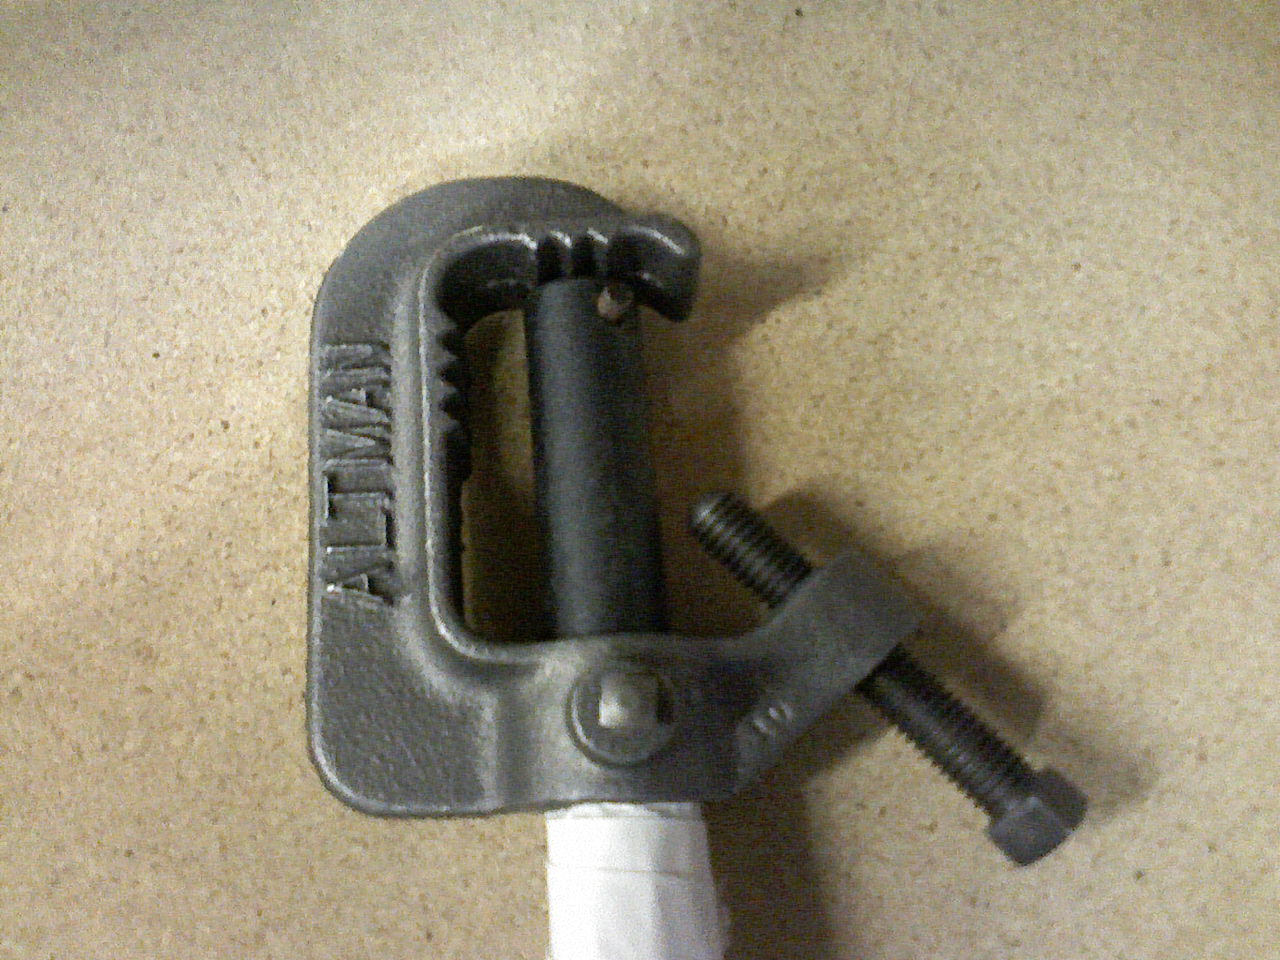 c clamp for pipes